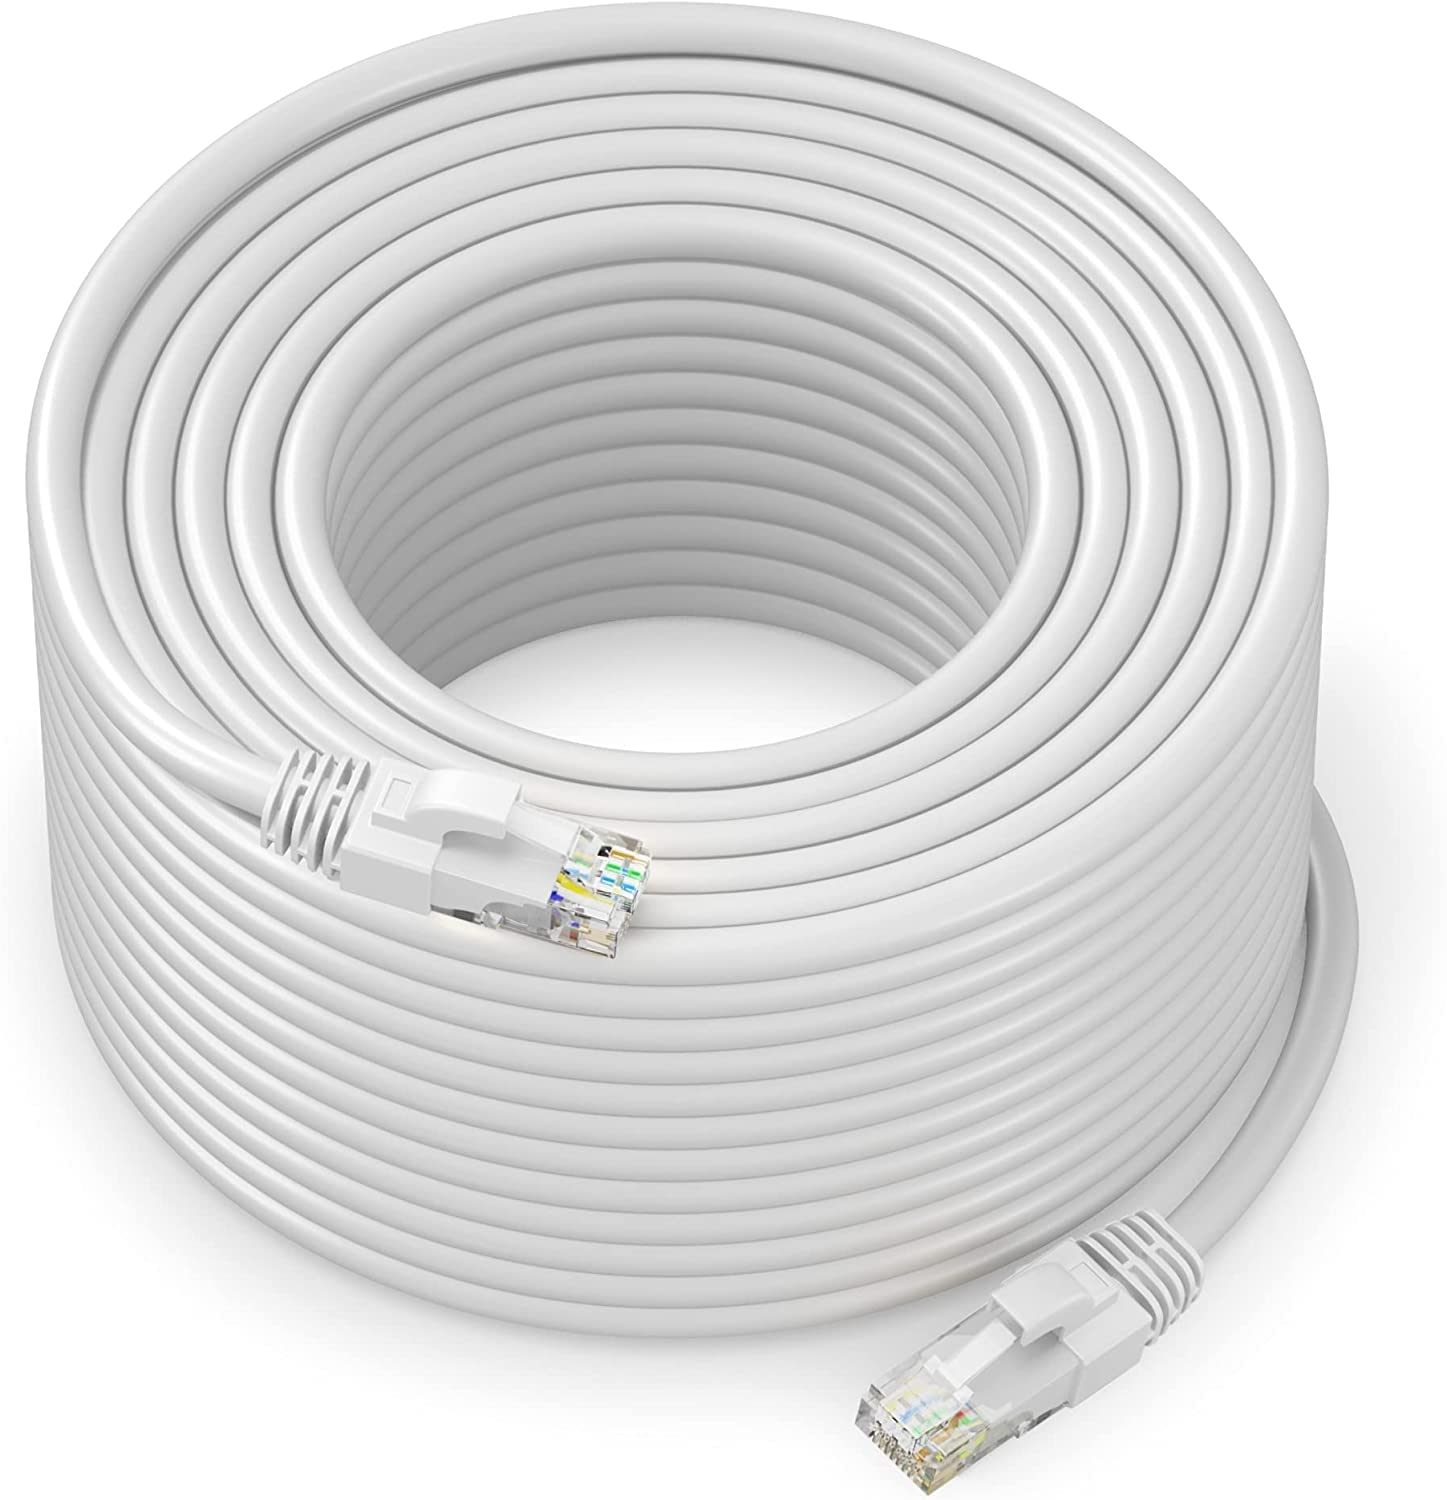 25 Meter CAT 6 Ethernet Patch Cable, RJ45 Computer Network Cord, Cat 6 Patch Cord LAN Cable UTP 24AWG (25m)